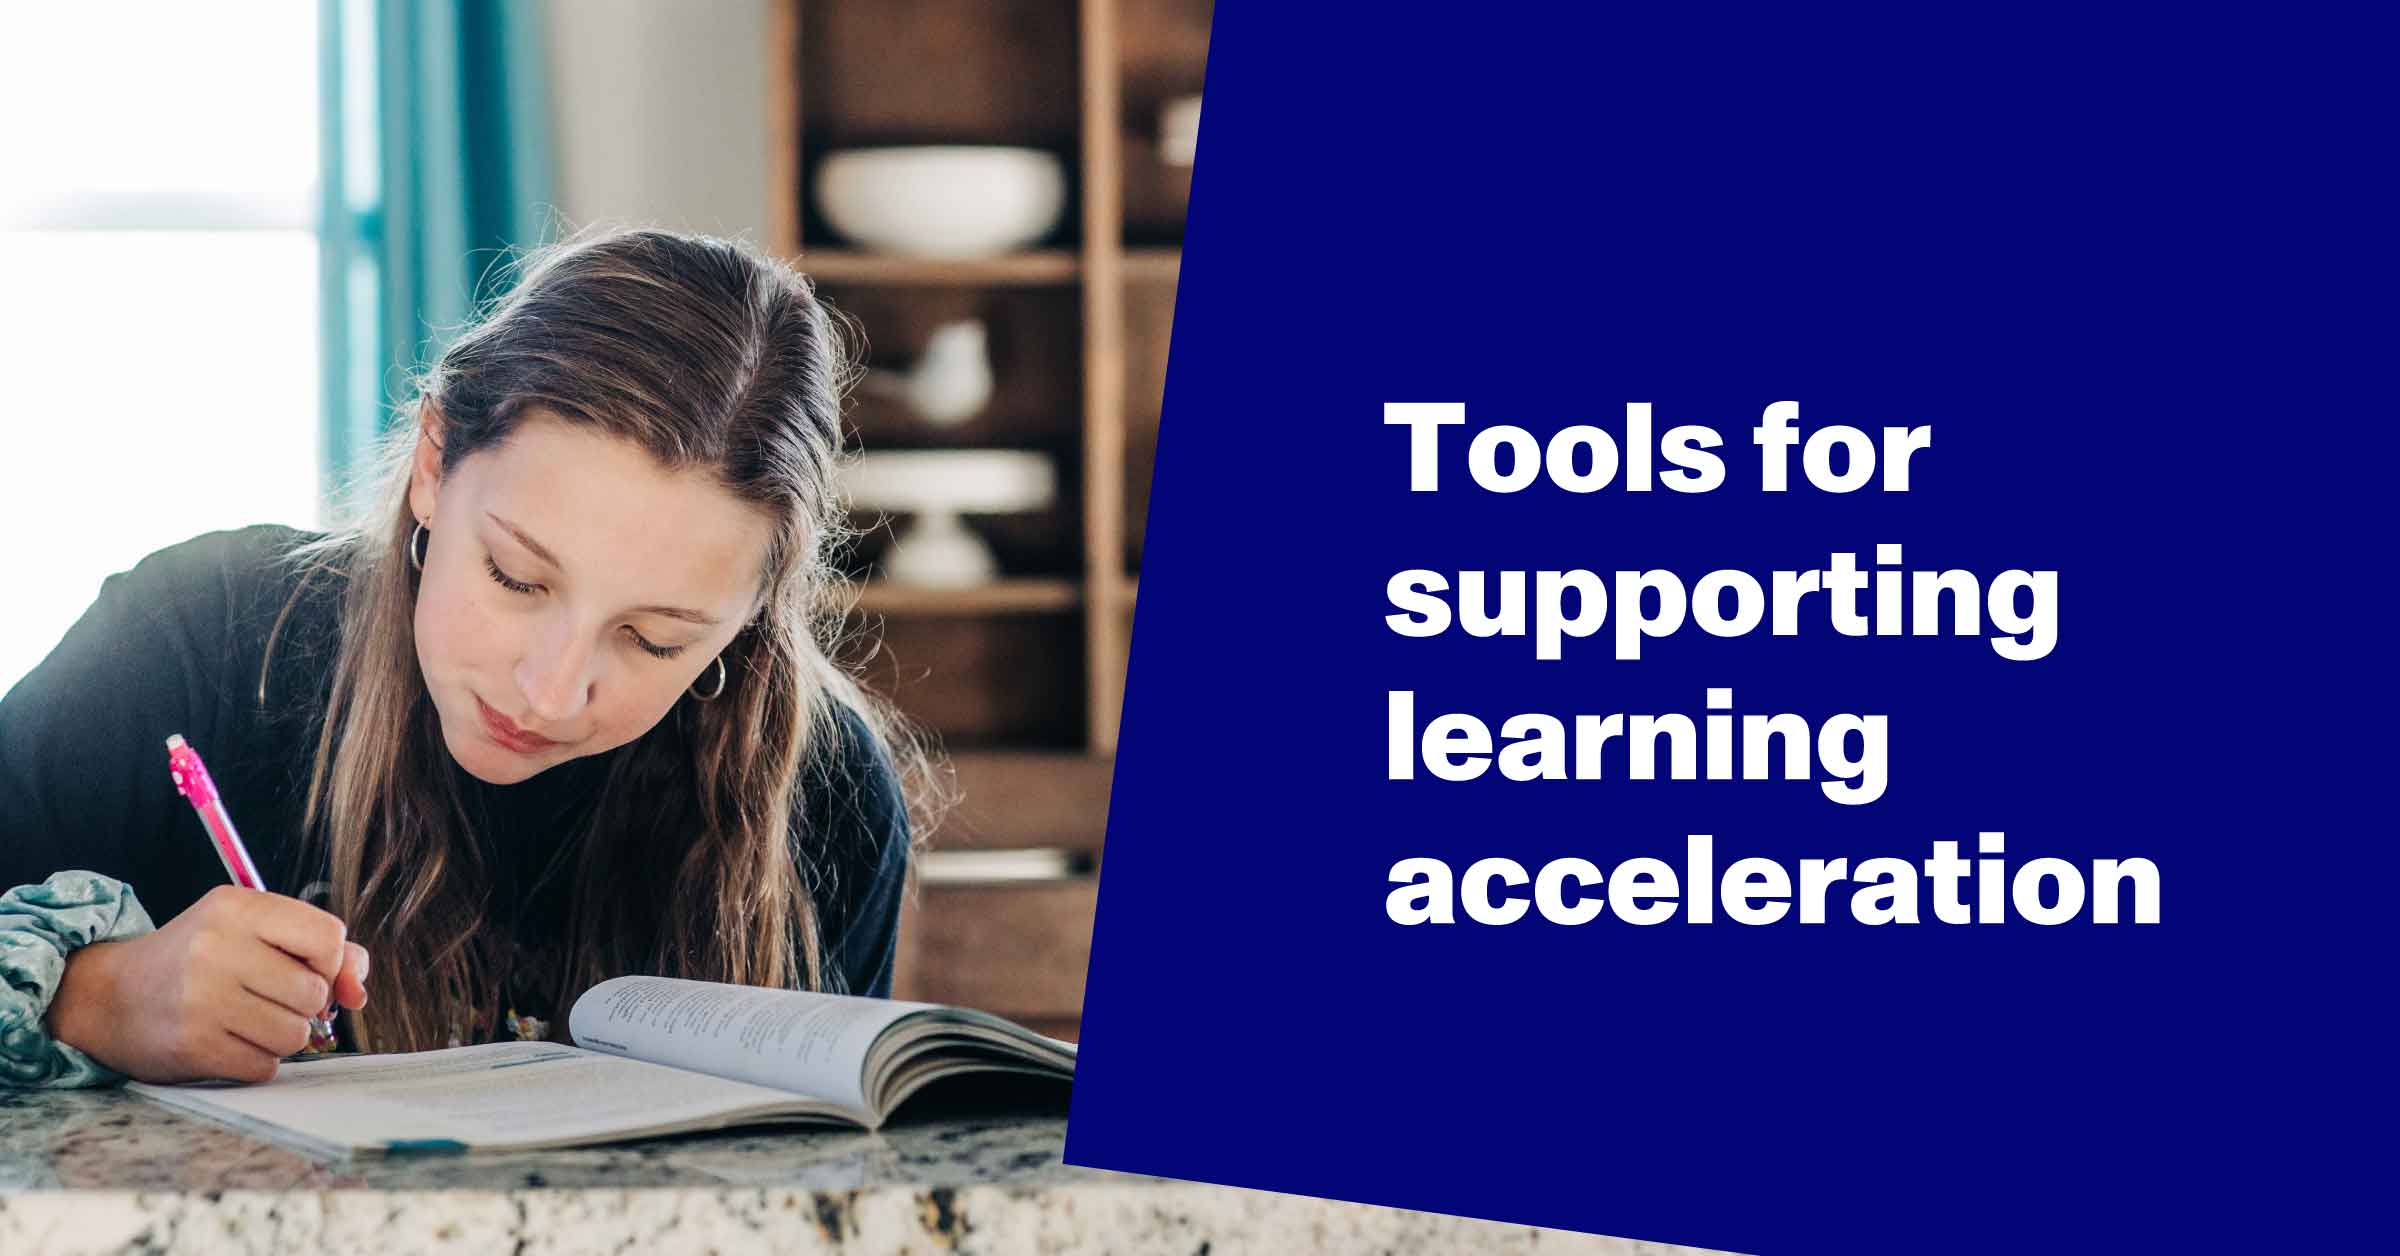 Tools for supporting learning acceleration